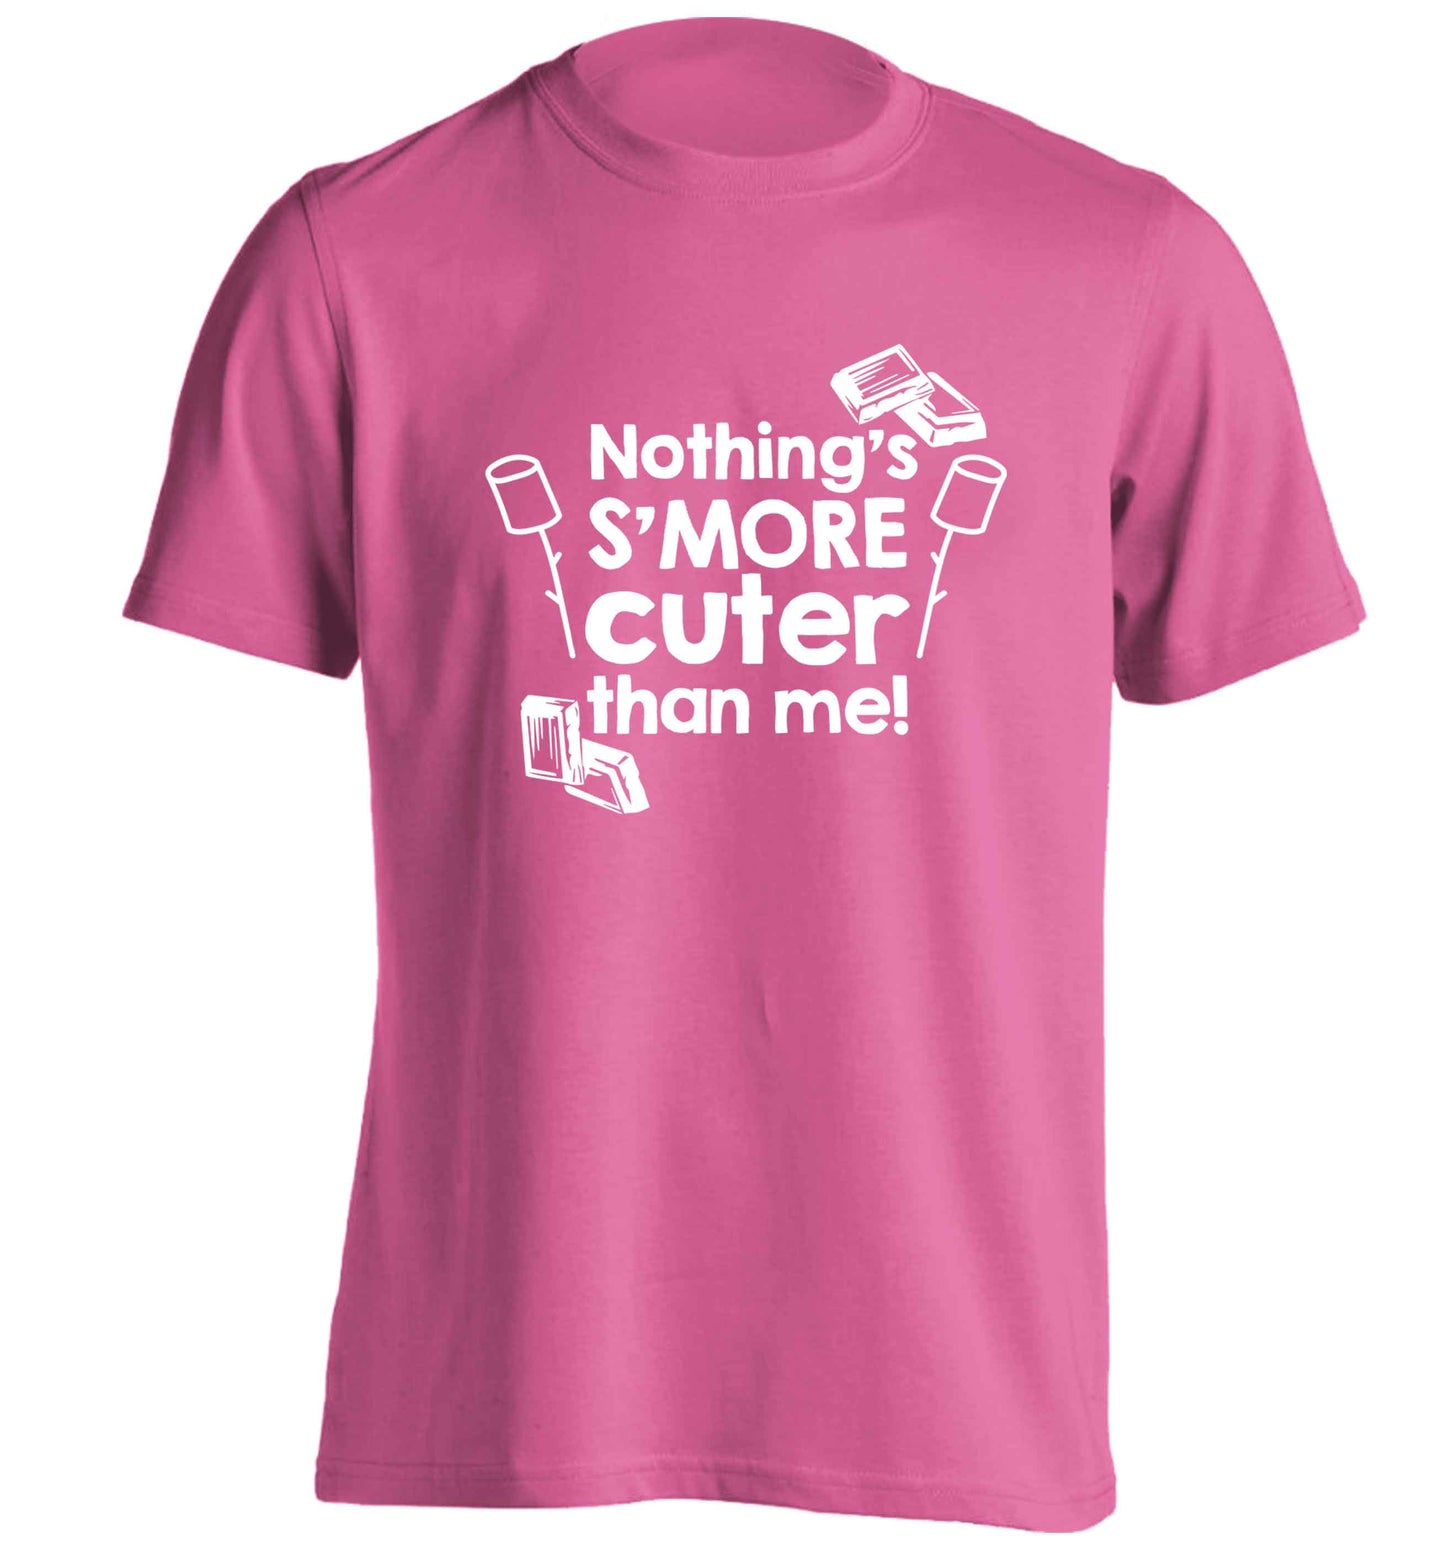 Nothing's s'more cuter than me! adults unisex pink Tshirt 2XL